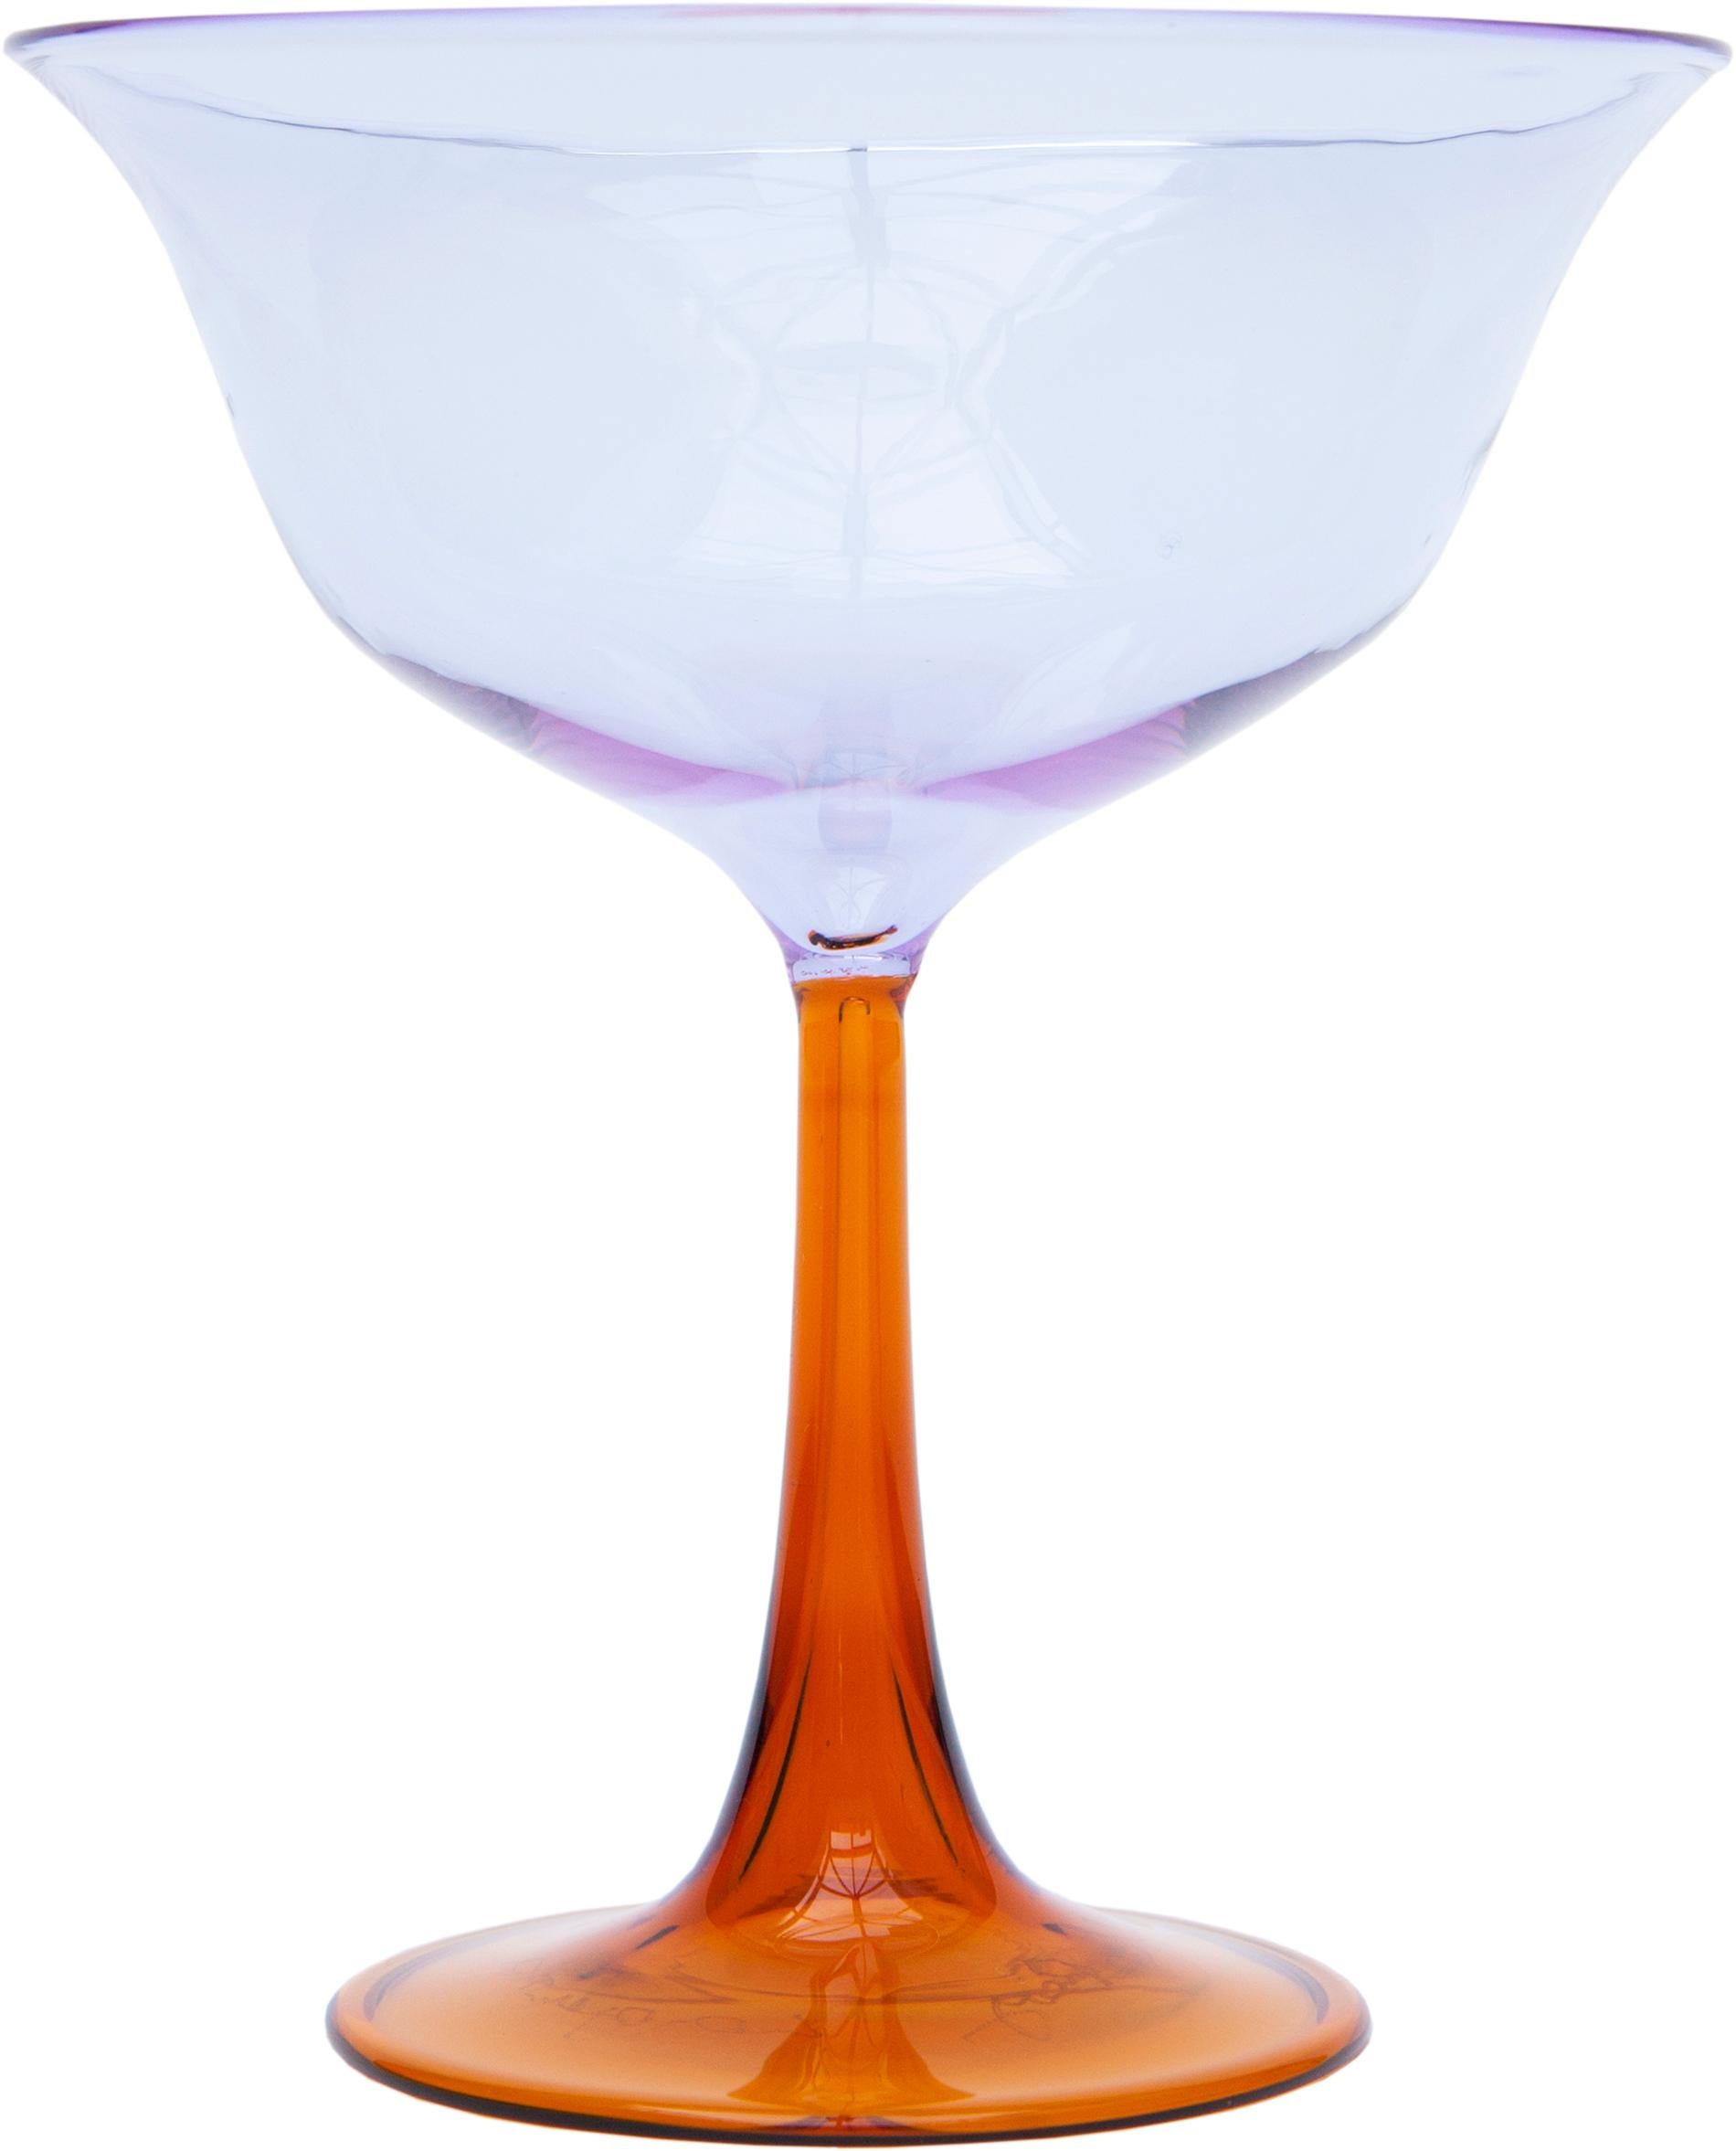 Campbell-Rey launches two new handblown Murano glassware collections crafted from Pyrex. Named Cosimo and Cosima, the two sibling collections are a continuation of the close relationship between Campbell-Rey and glassmaker Laguna B, bringing